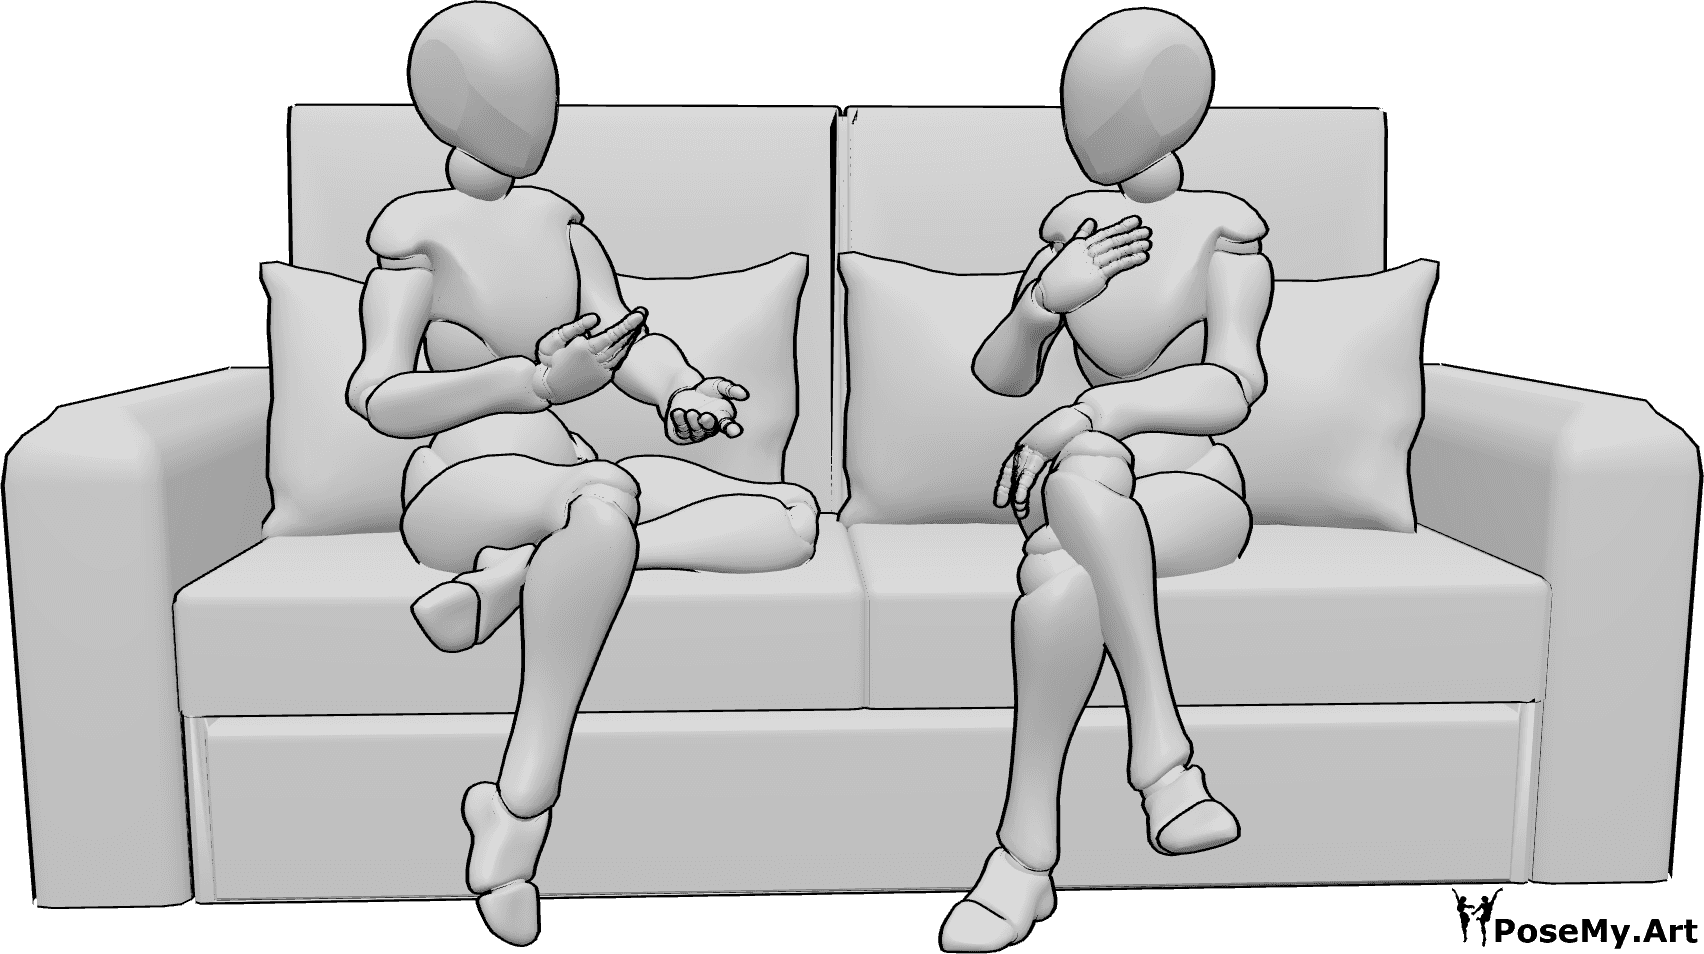 Pose Reference- Females sitting casual conversation pose - Two females are sitting on a couch and talking, having a casual conversation